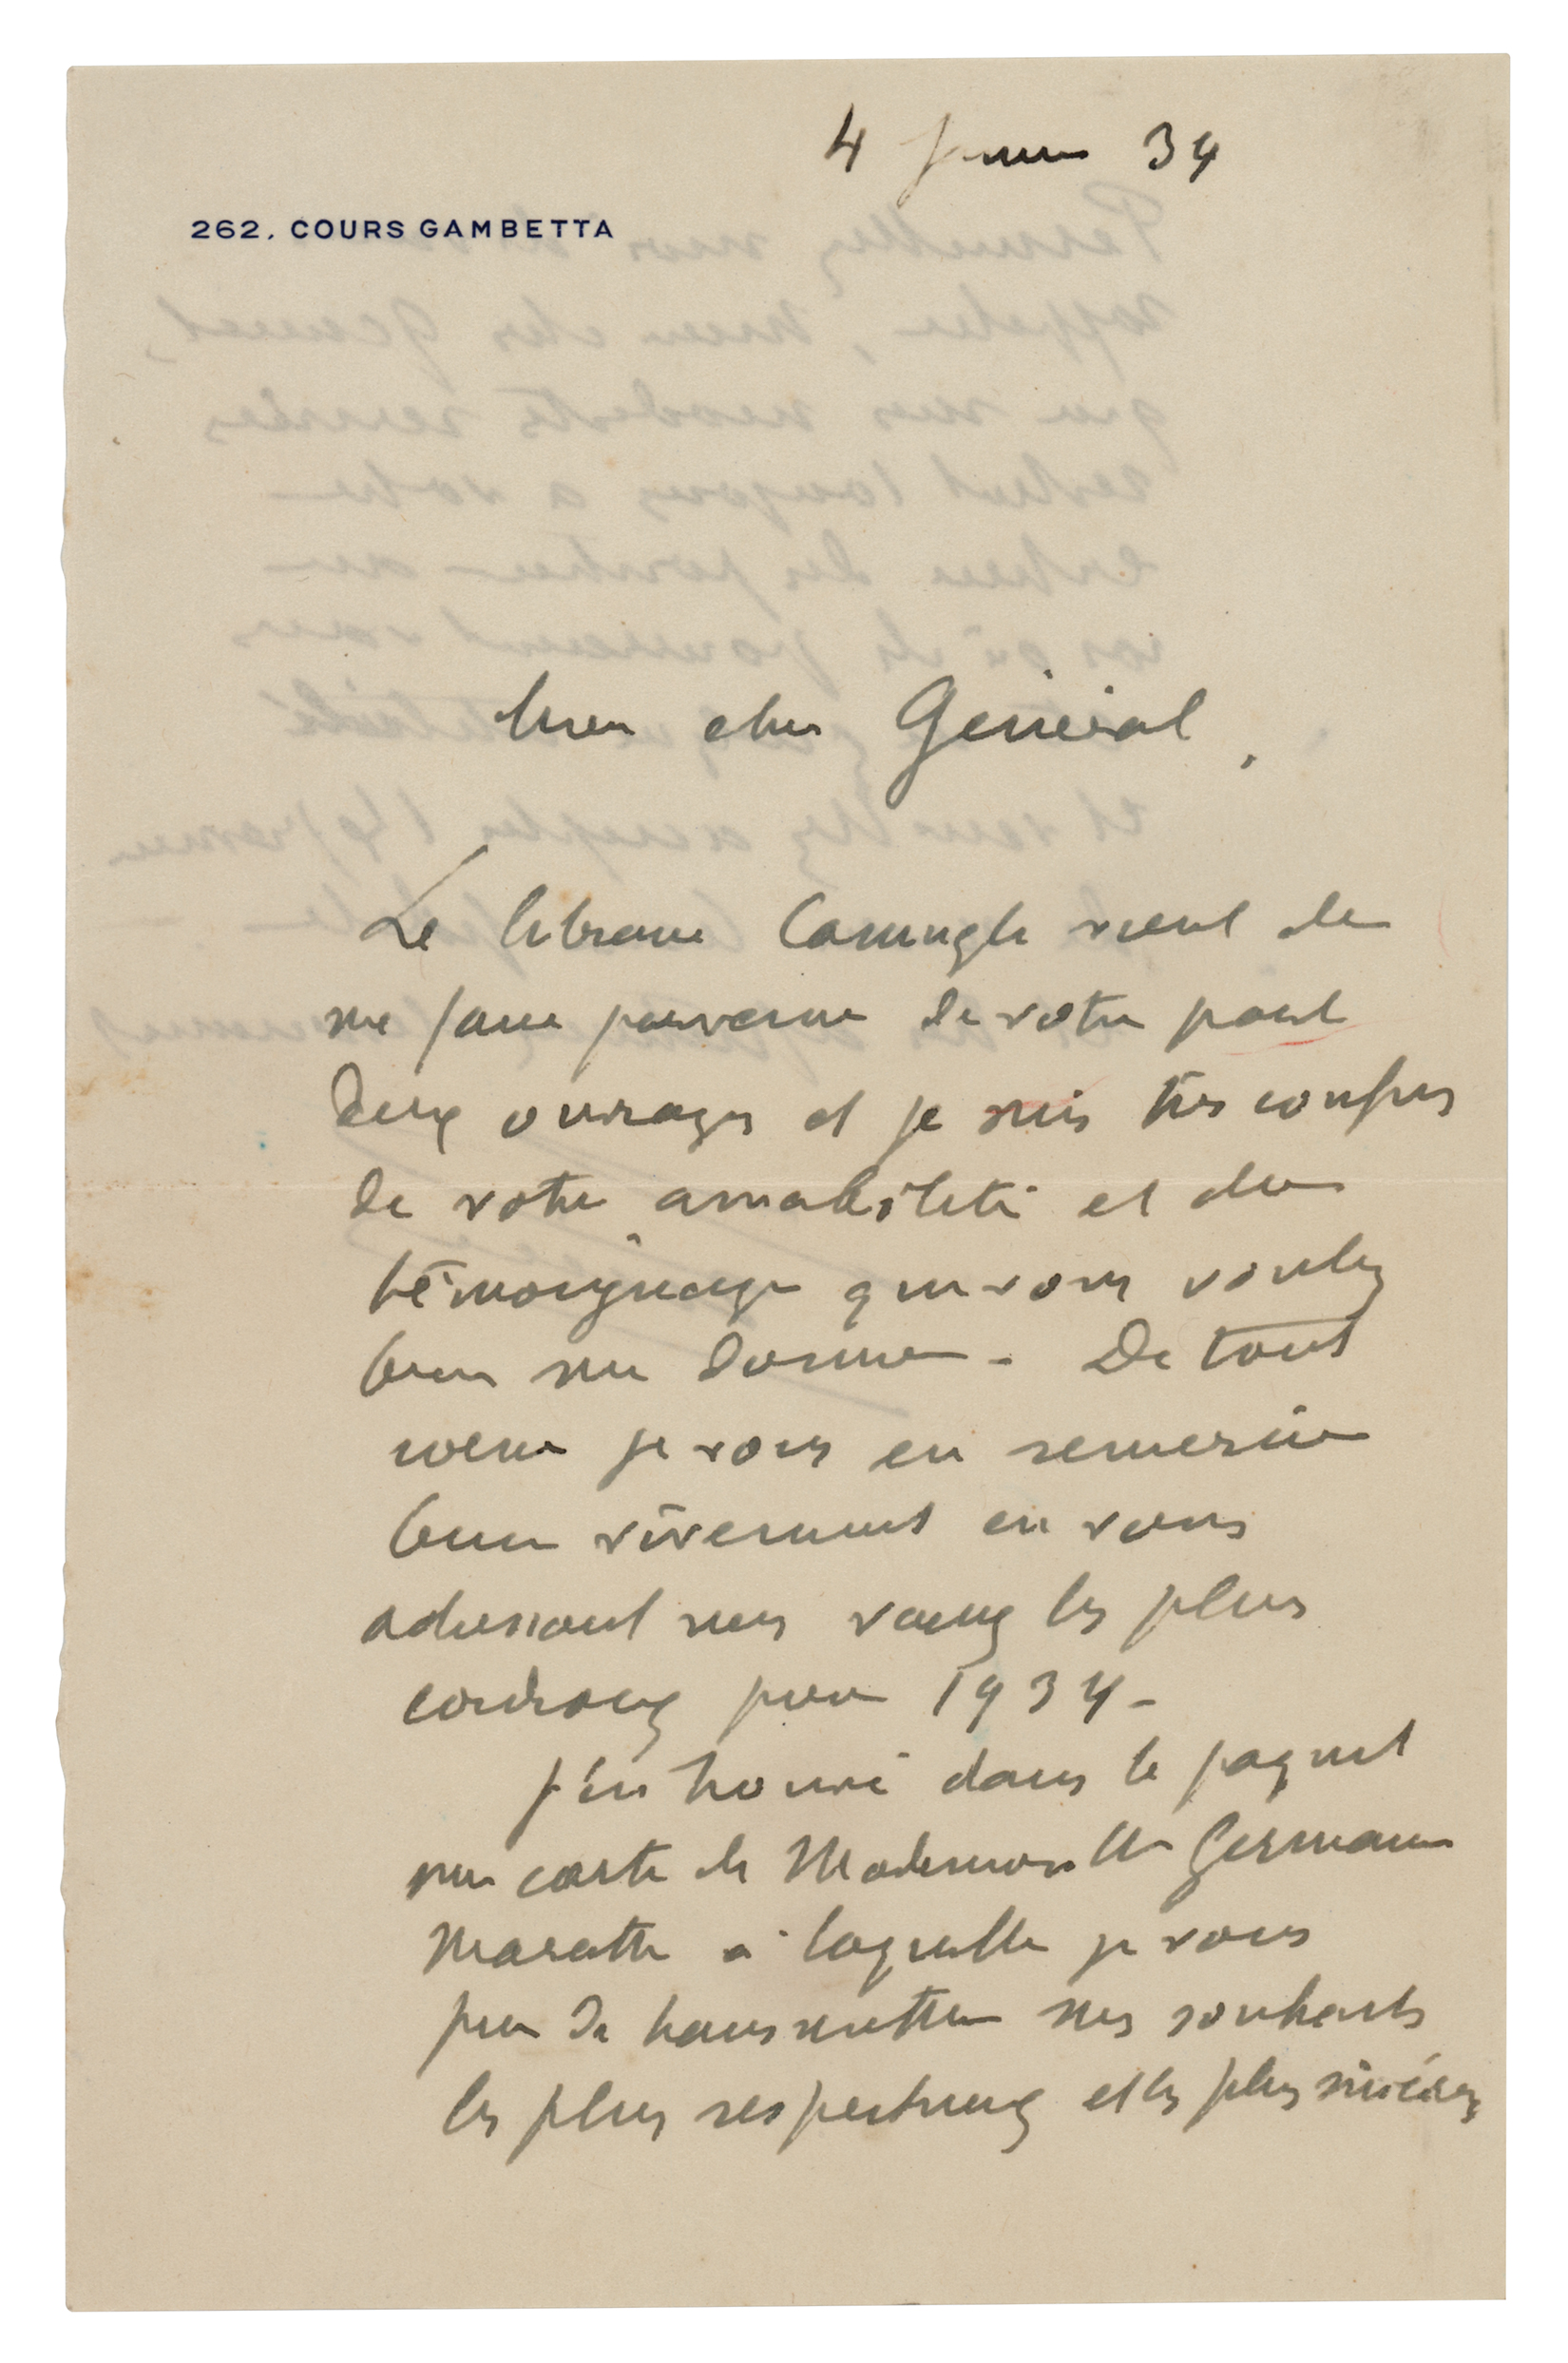 Lot #161 Auguste and Louis Lumiere (2) Autograph Letters Signed - Image 1